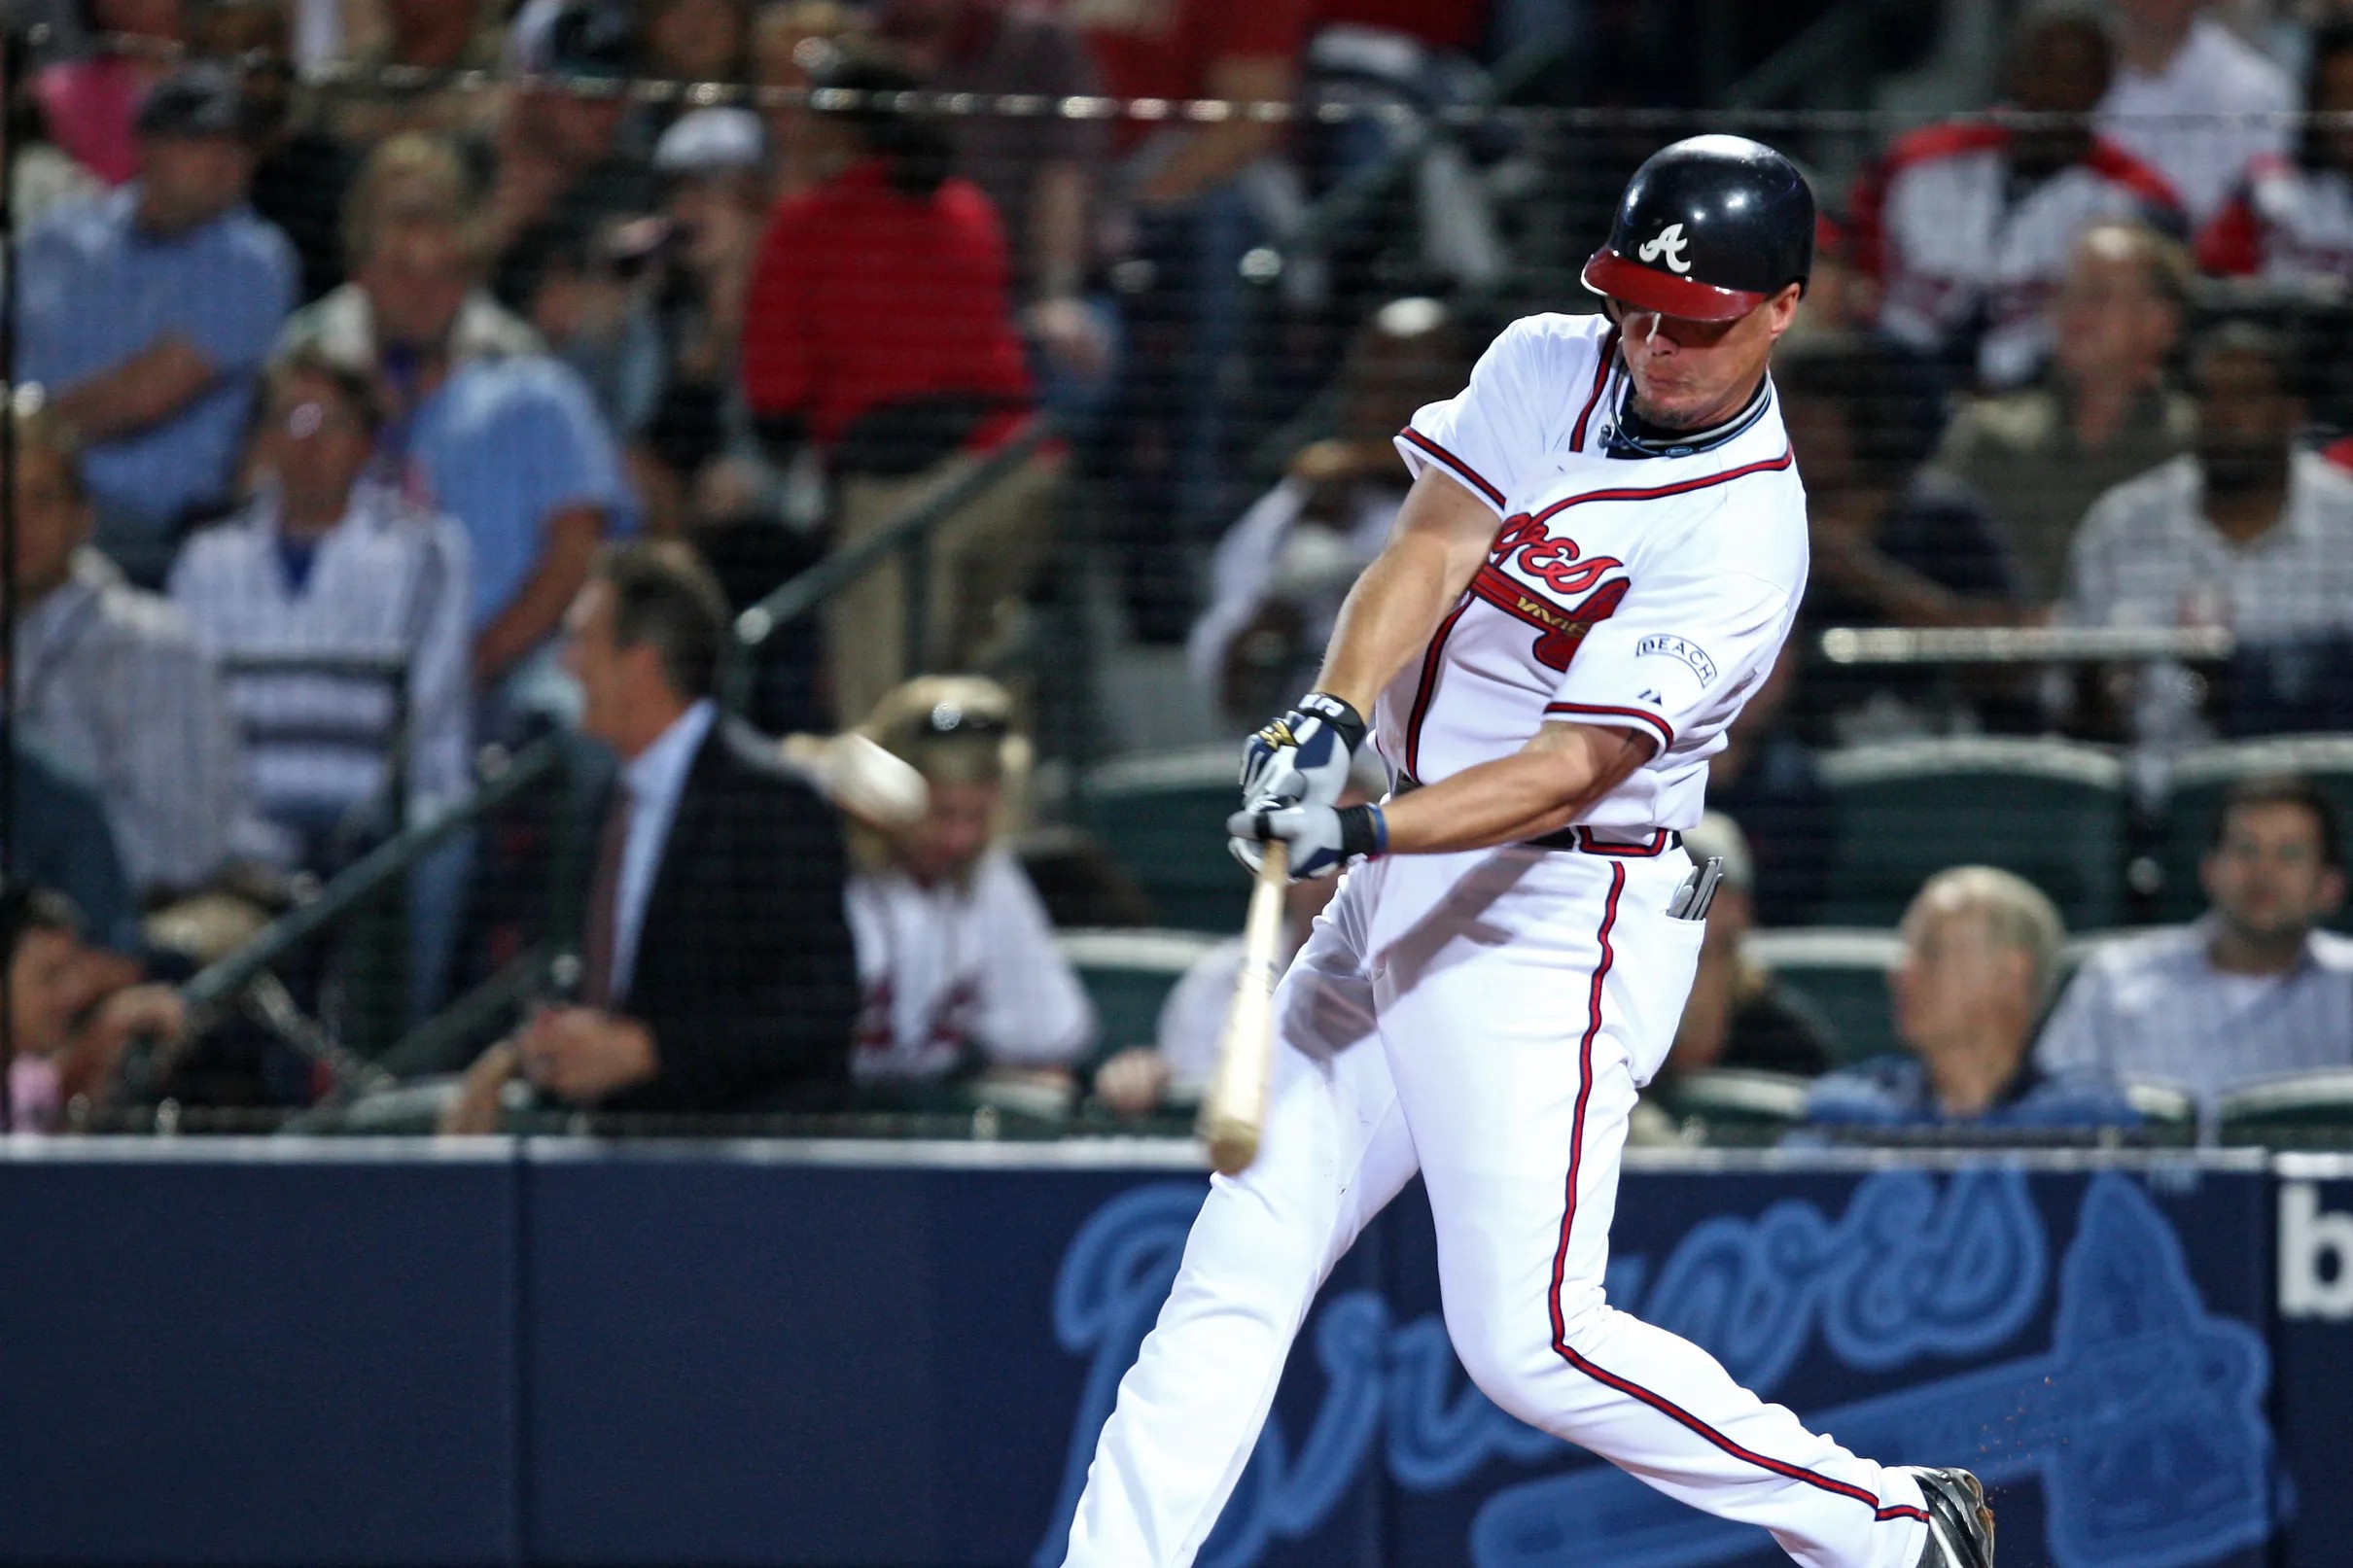 This Day in Braves History: Chipper Jones hits his 400th career home run